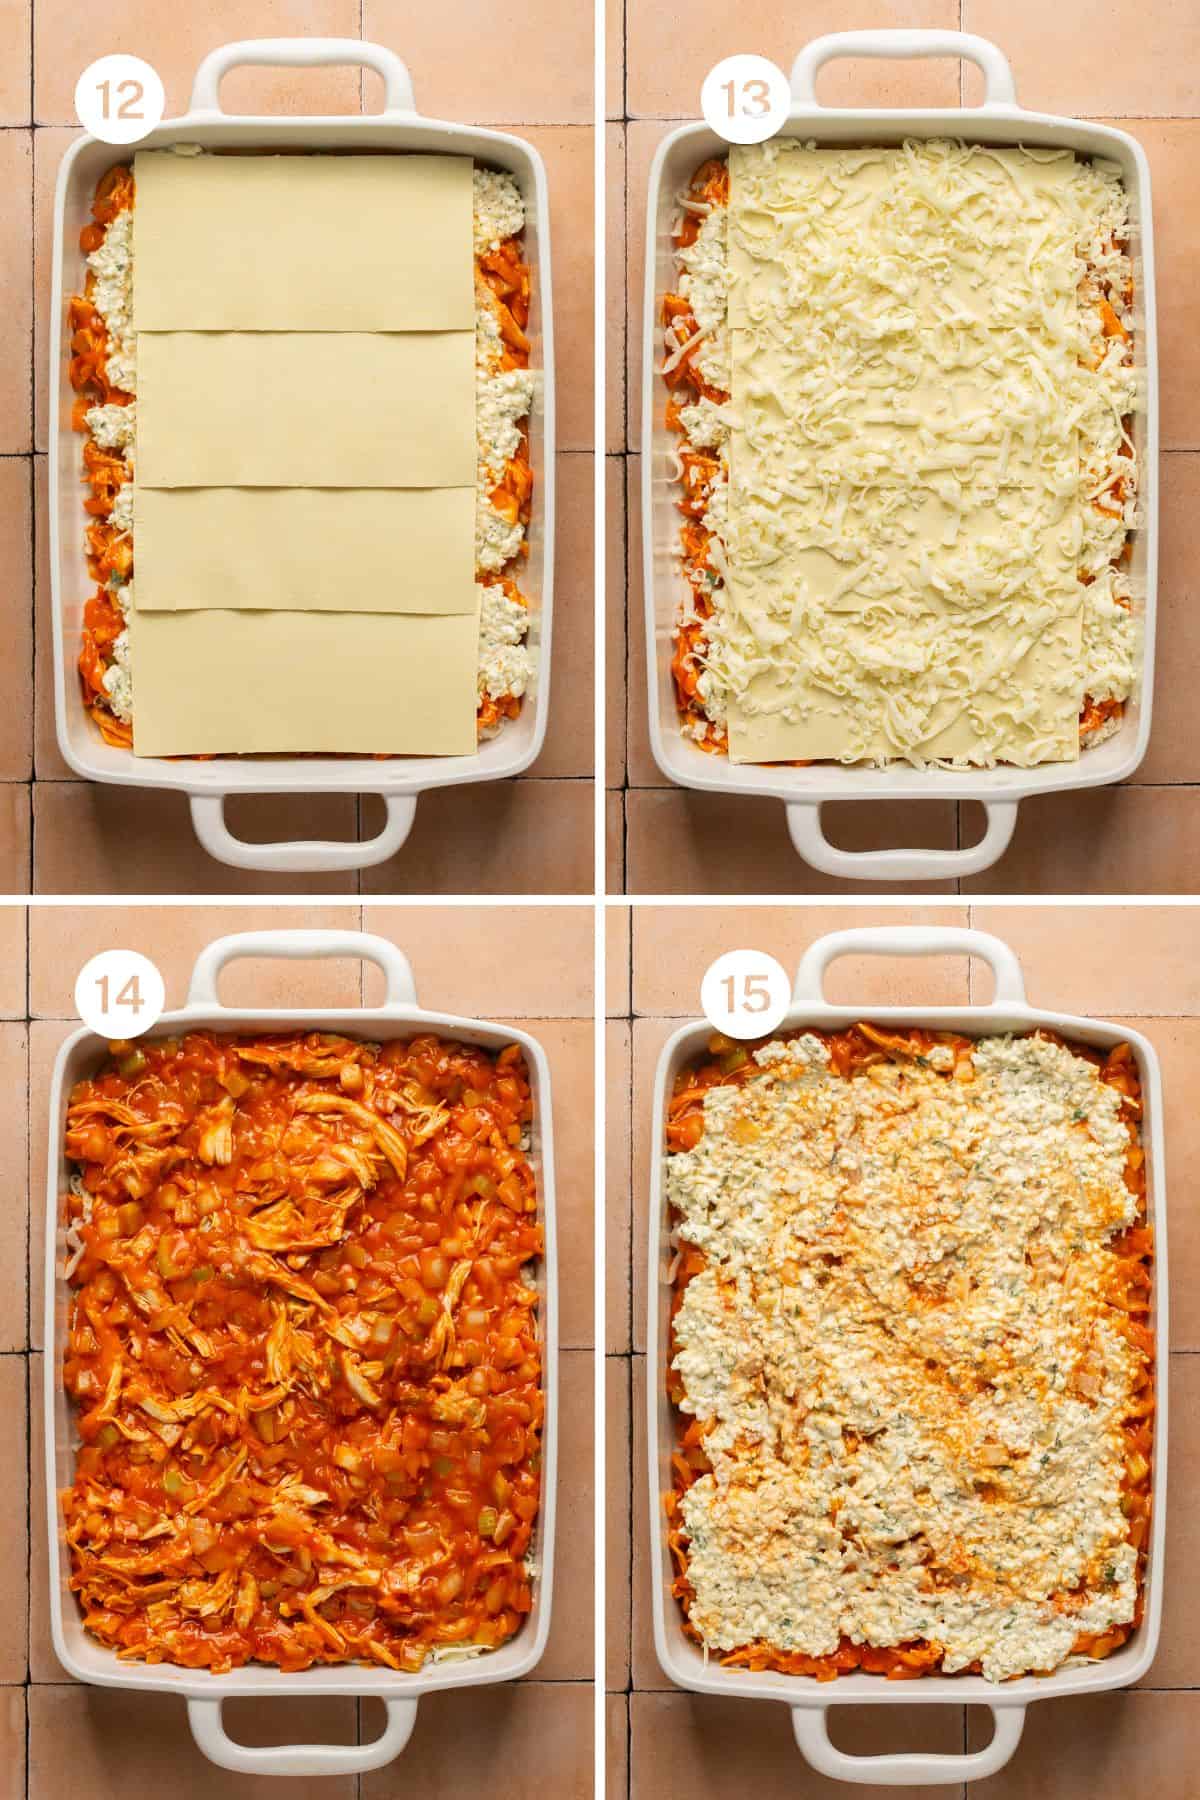 Four images showing the second layers or the lasagna with noodles, cheese, chicken mixture and cottage cheese filling.